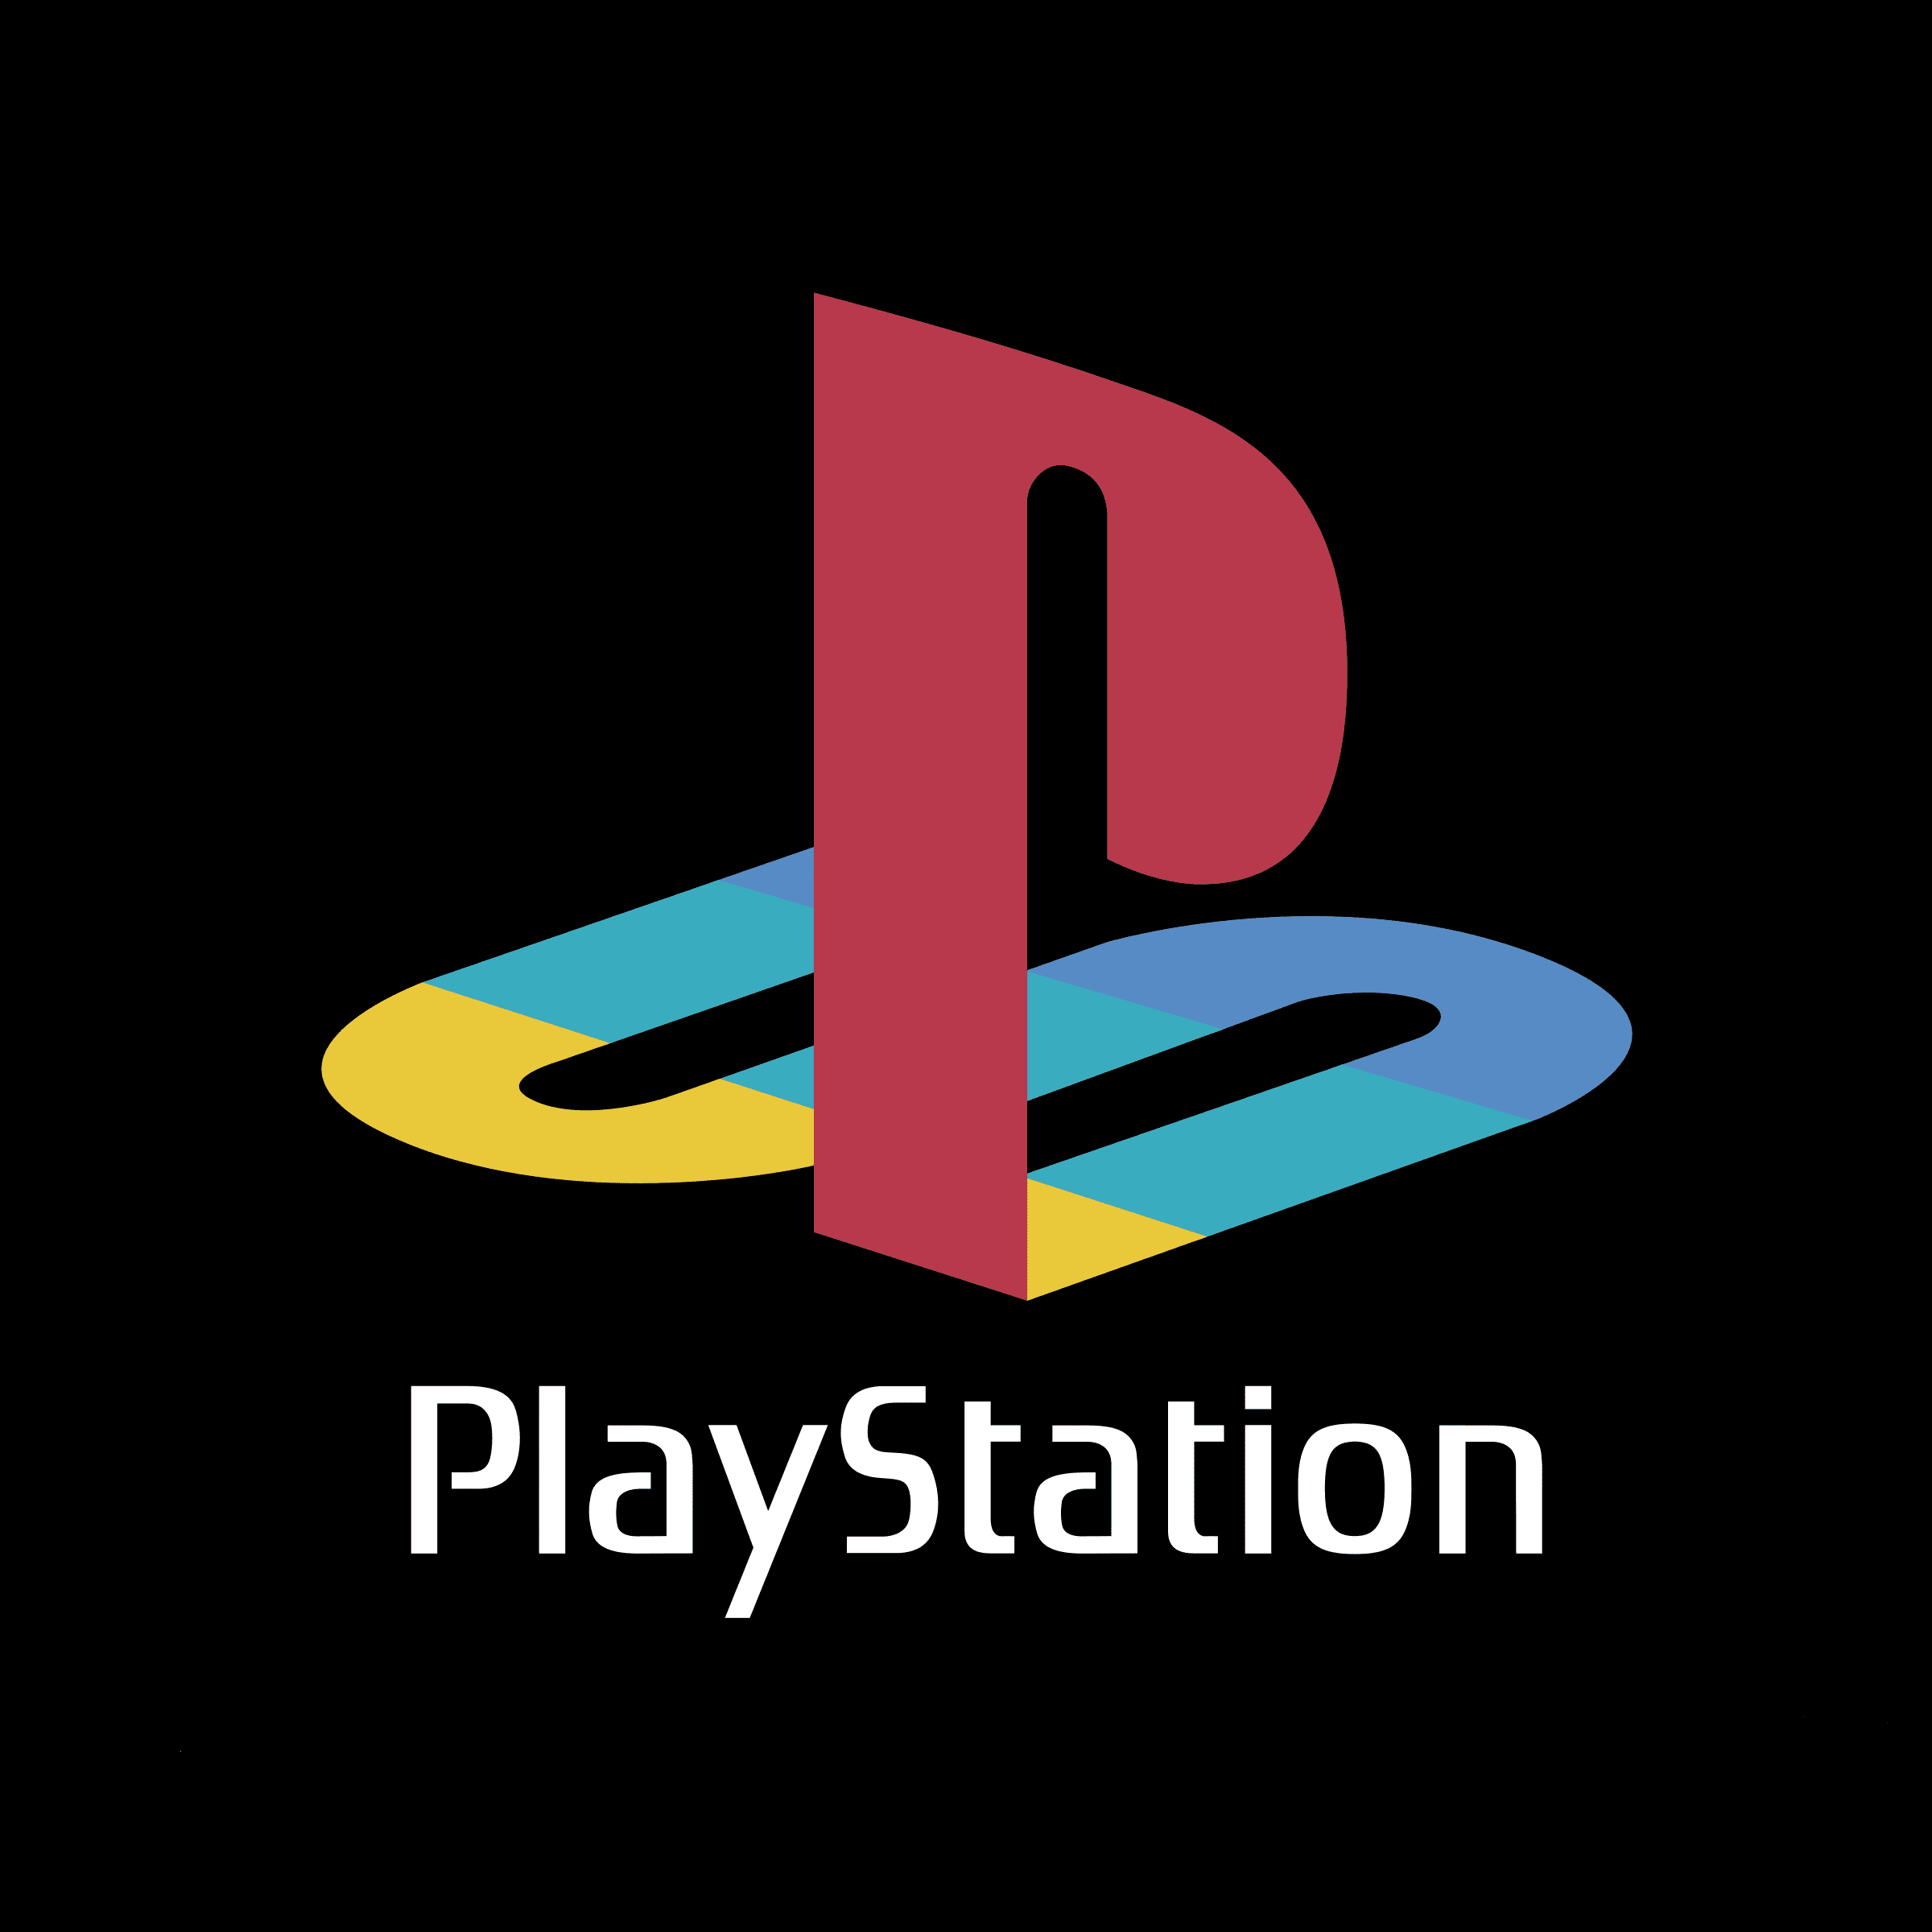 Sony Opens PlayStation Productions Studio To Adapt Games To Movies, TV